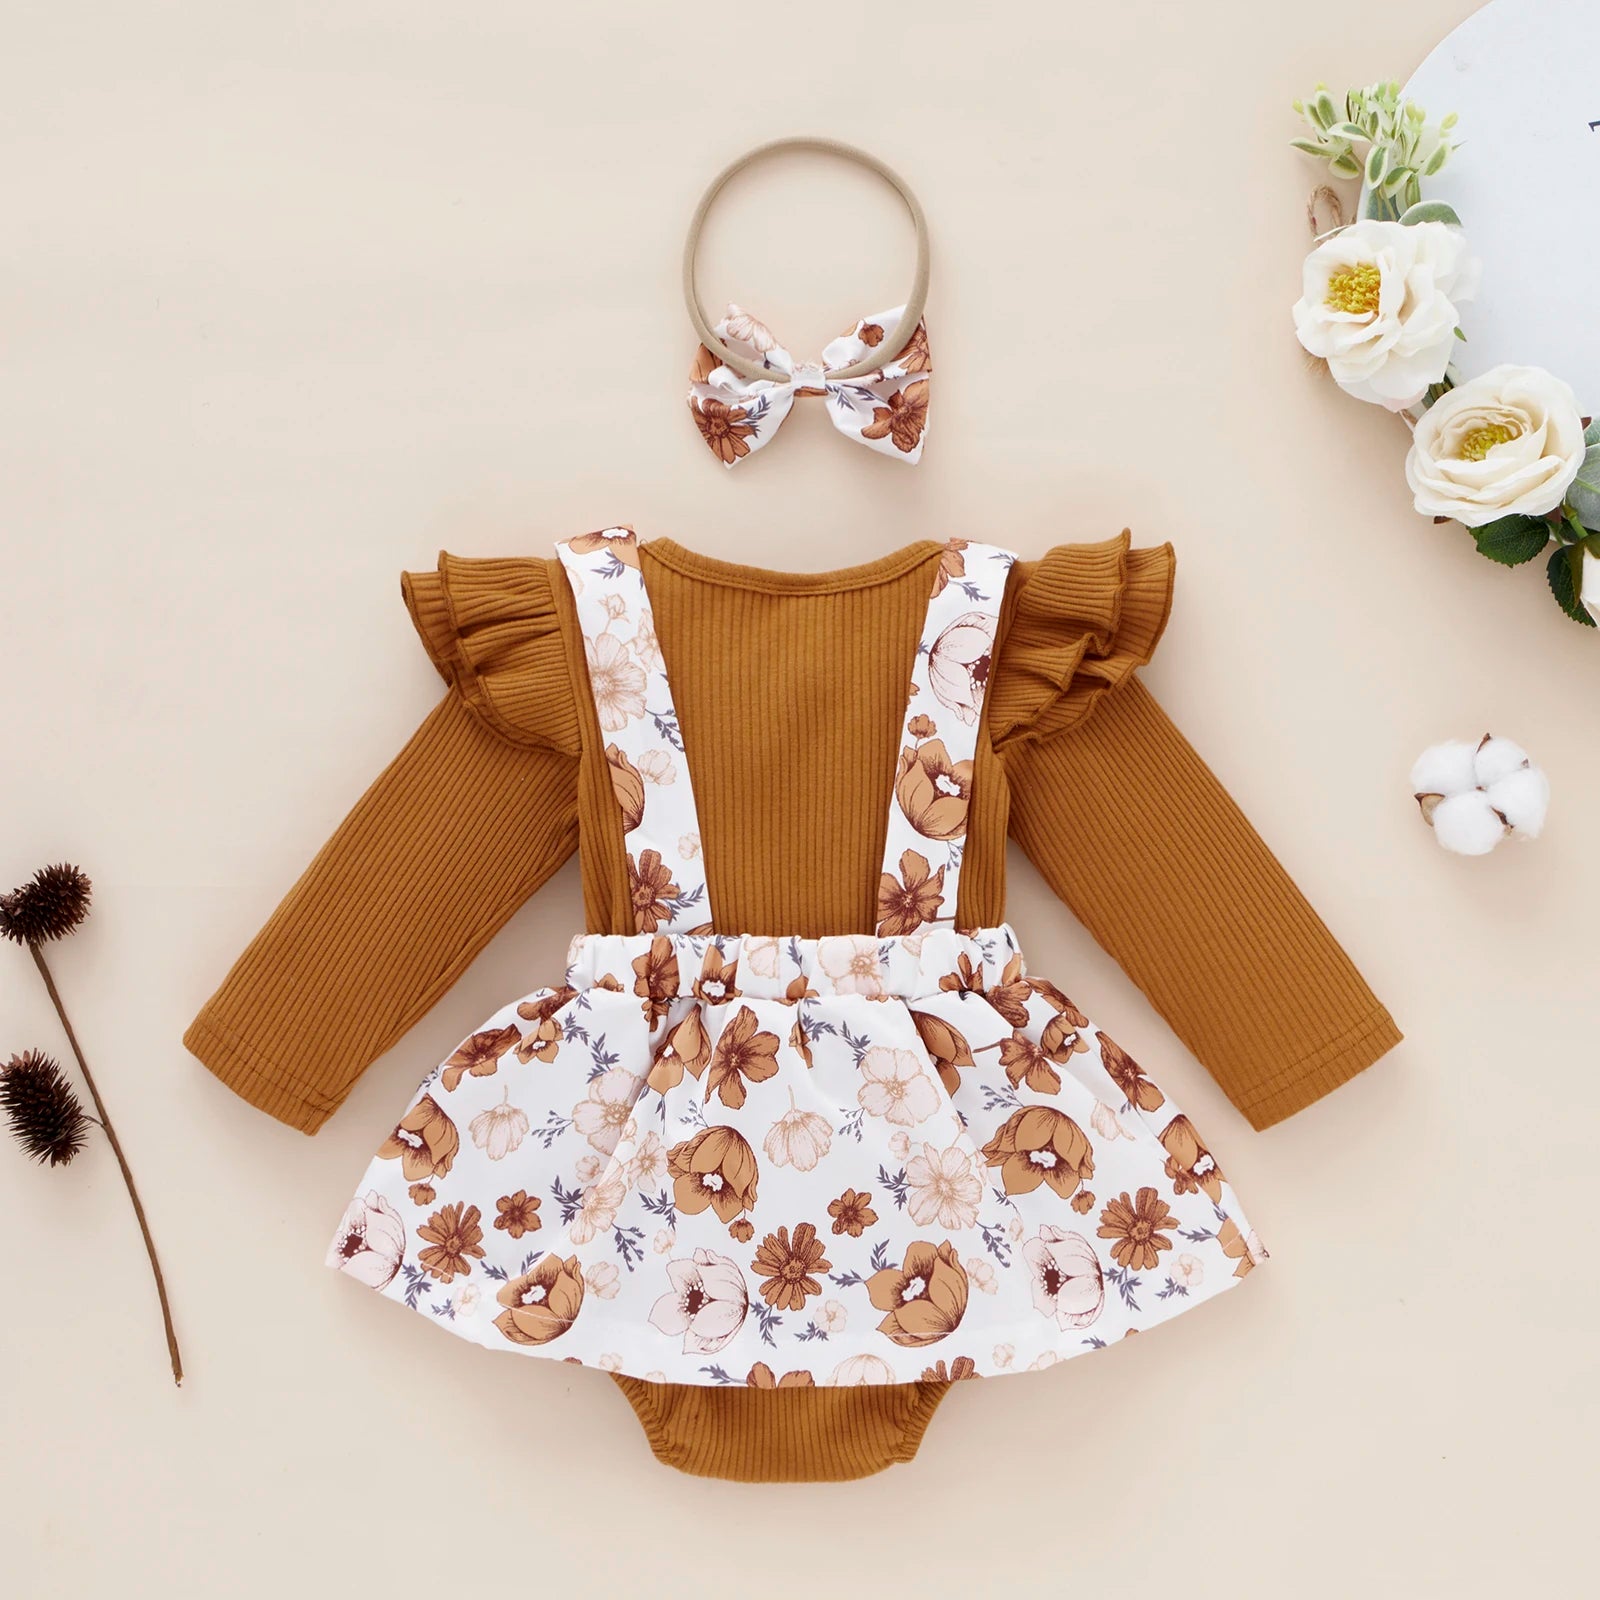 Adorable Floral Lace Jumpsuit with Headband in Brown